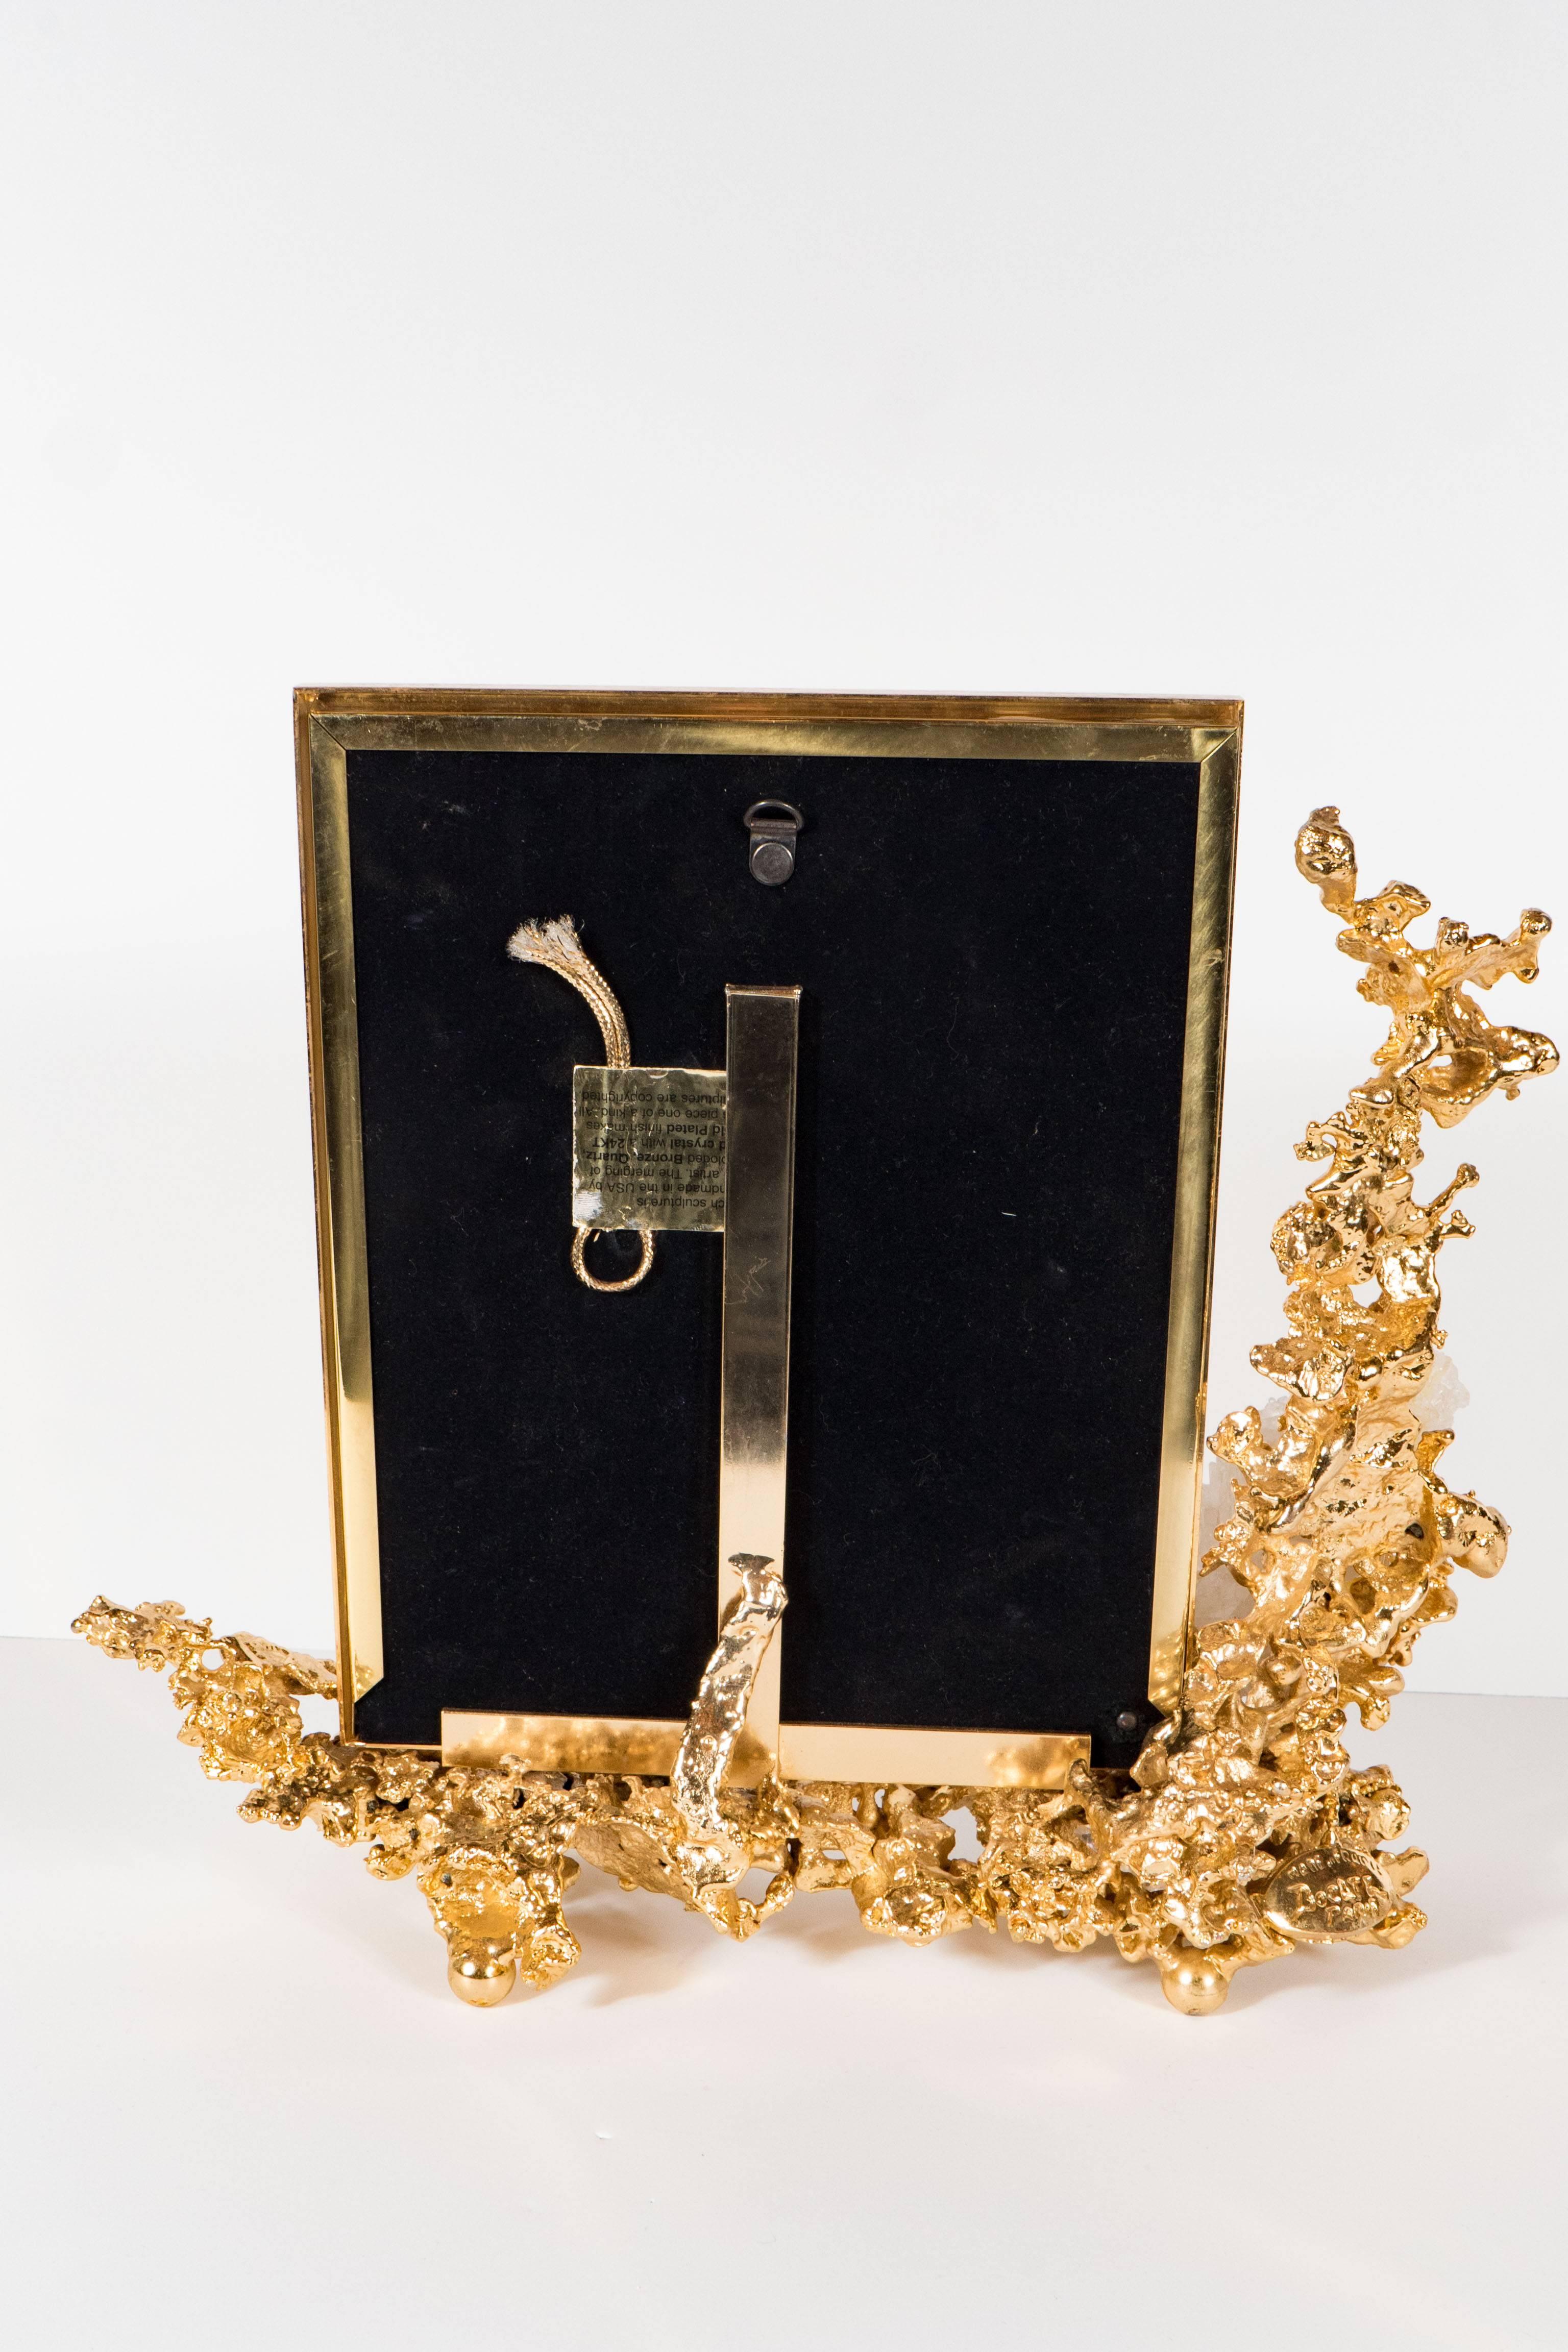 Exquisite Picture Frame by Claude Boeltz in Gilded Bronze and Rock Crystal 2